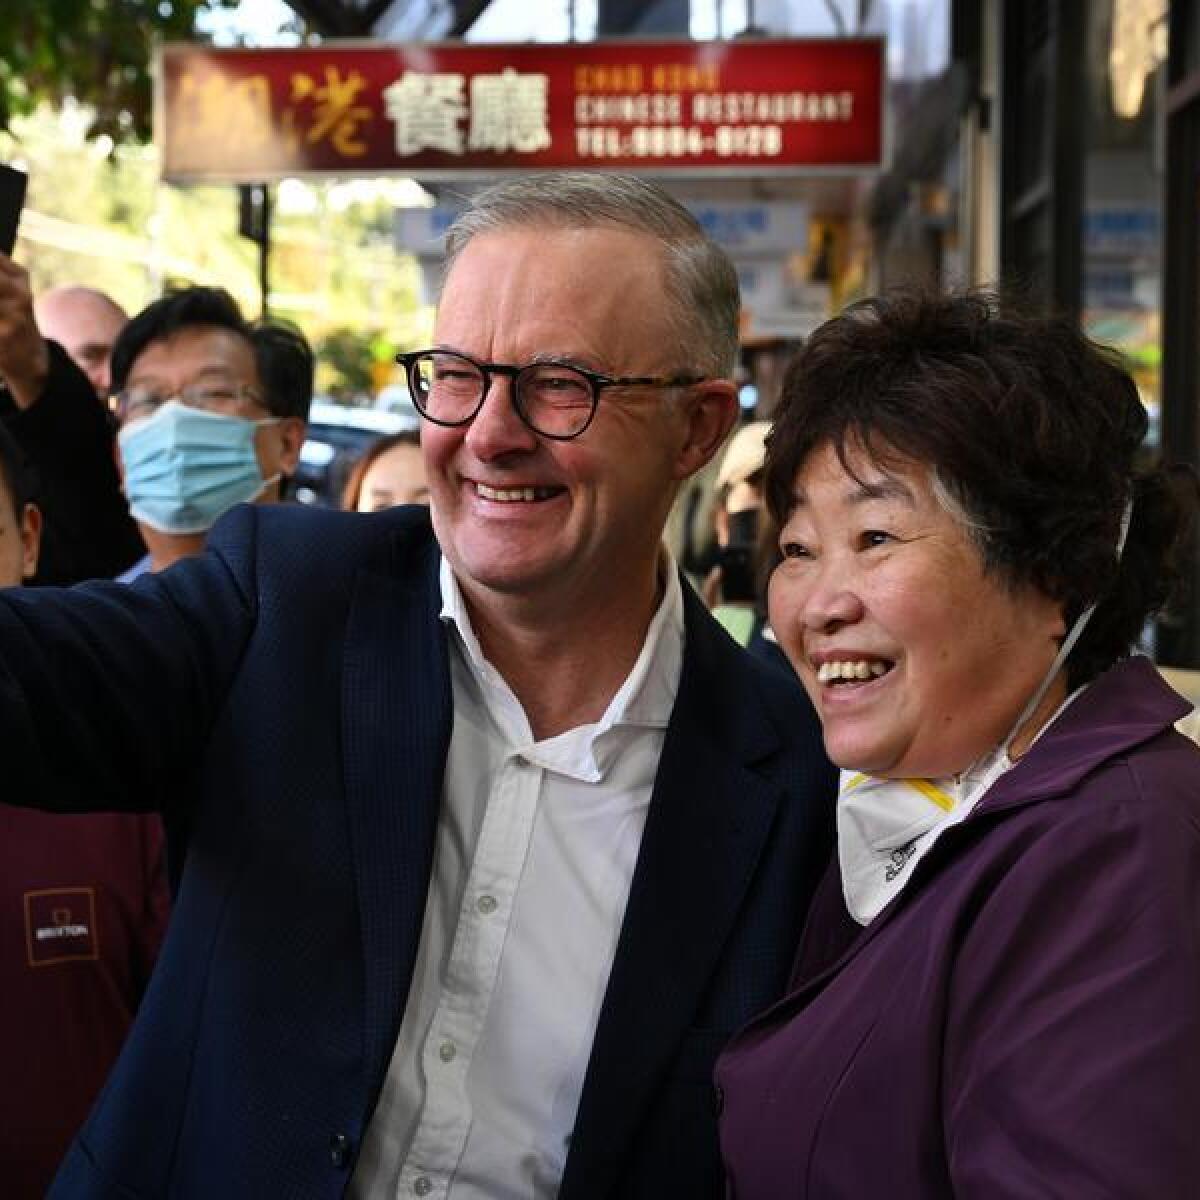 Prime Minister Anthony Albanese during a street walk in Sydney.